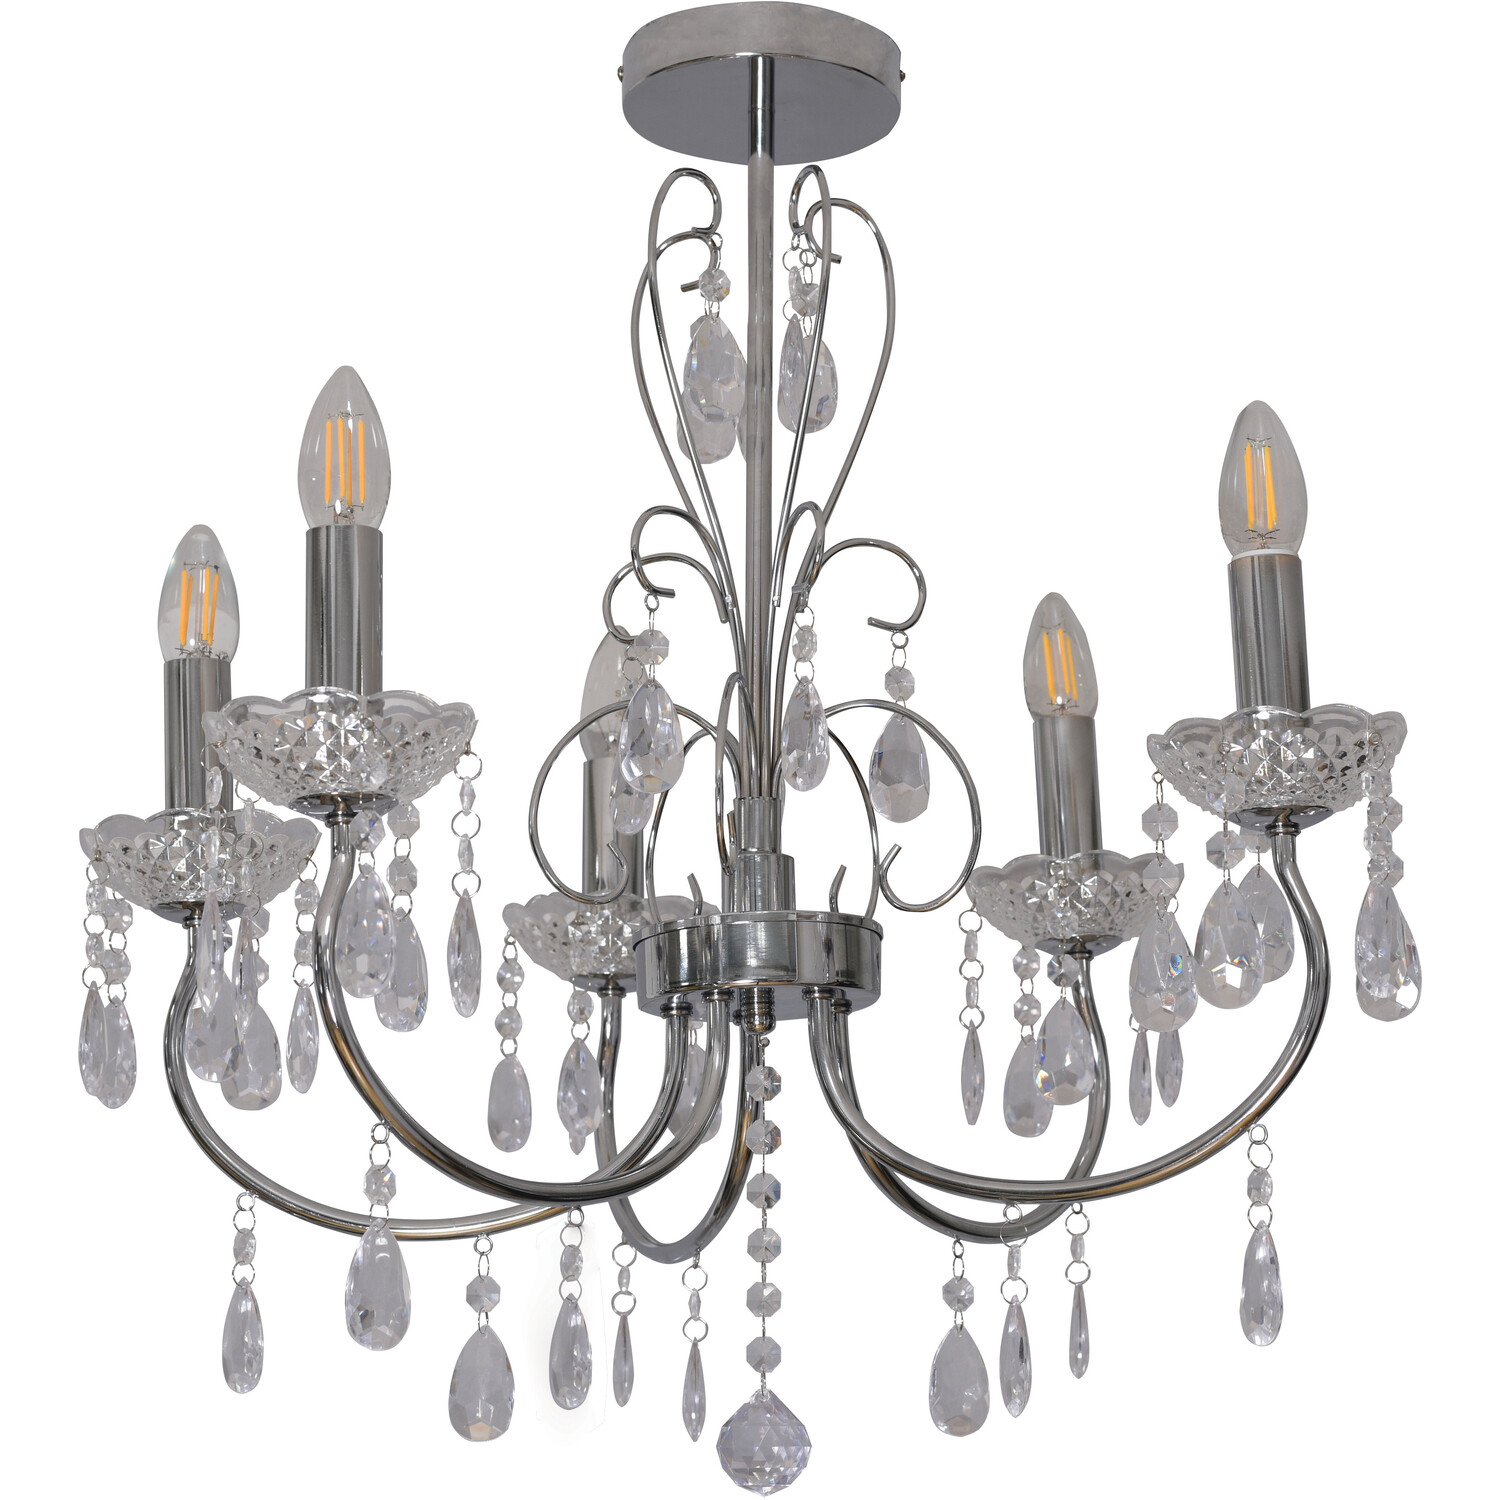 Victoria 5 Light Chrome and Crystal Chandelier Image 1